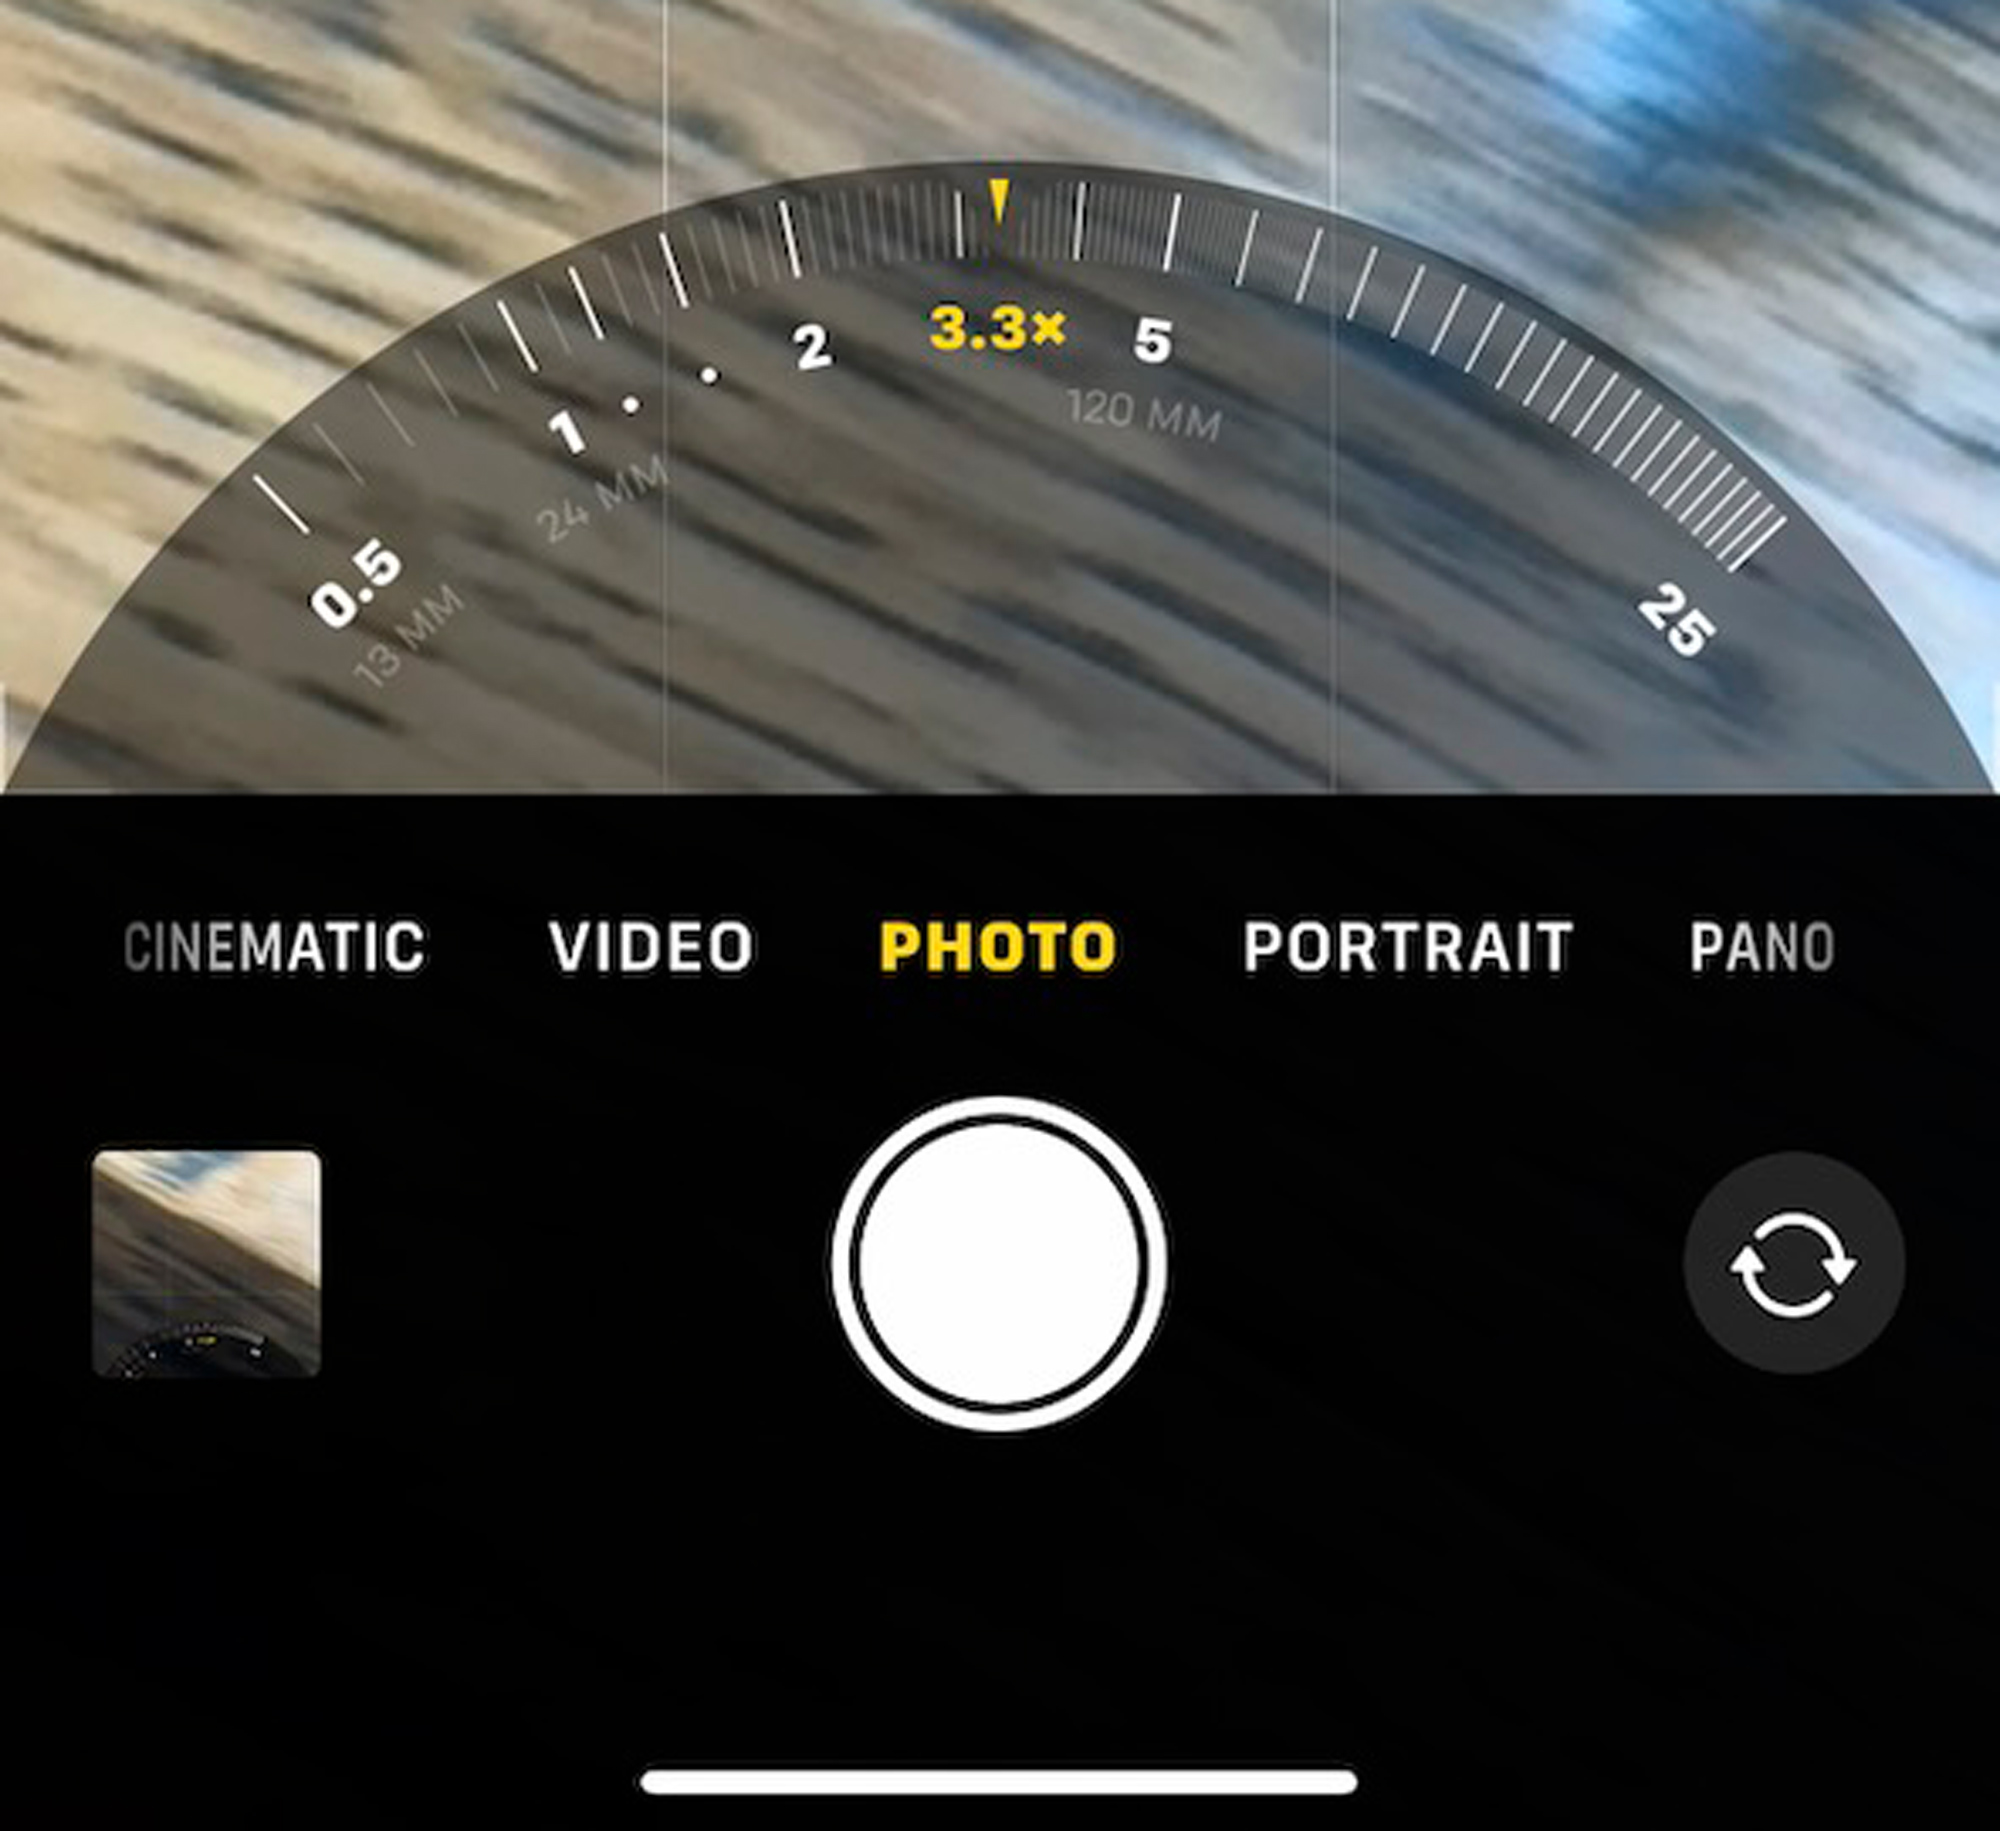 By holding any of the camera setting buttons you make a dial pop us showing the full range of capture magnifications available. You can also see 35 mm equivalent focal lengths